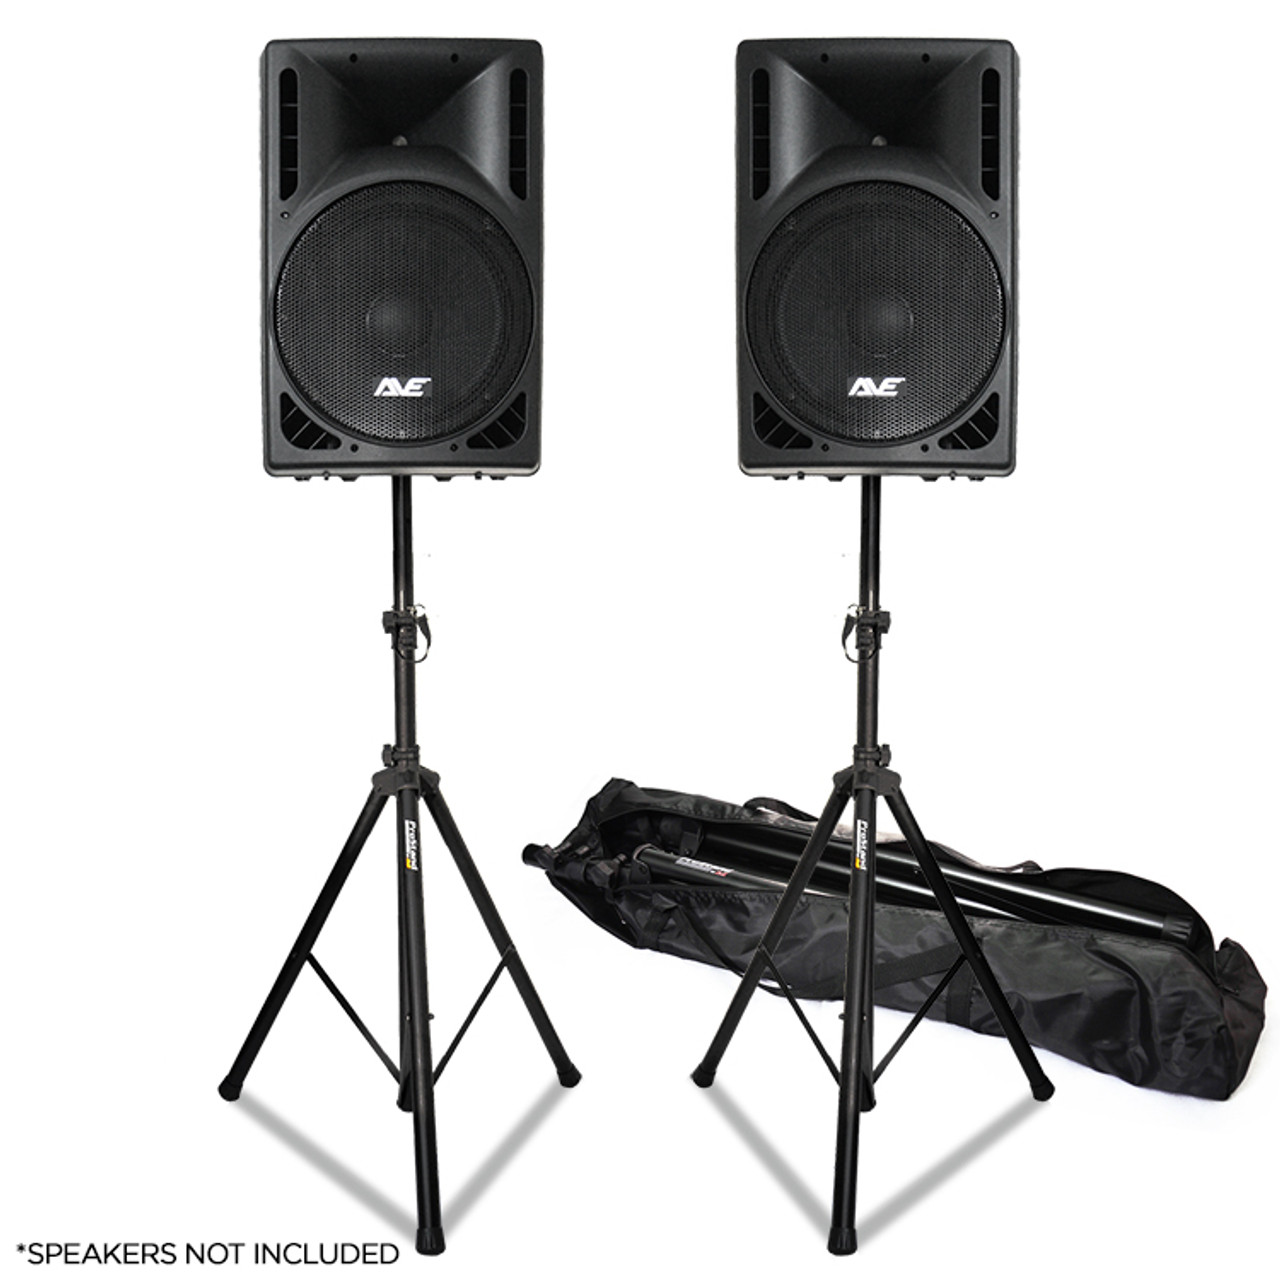 Prostand SS-Kit Speaker Stand Pair with Carry Bag